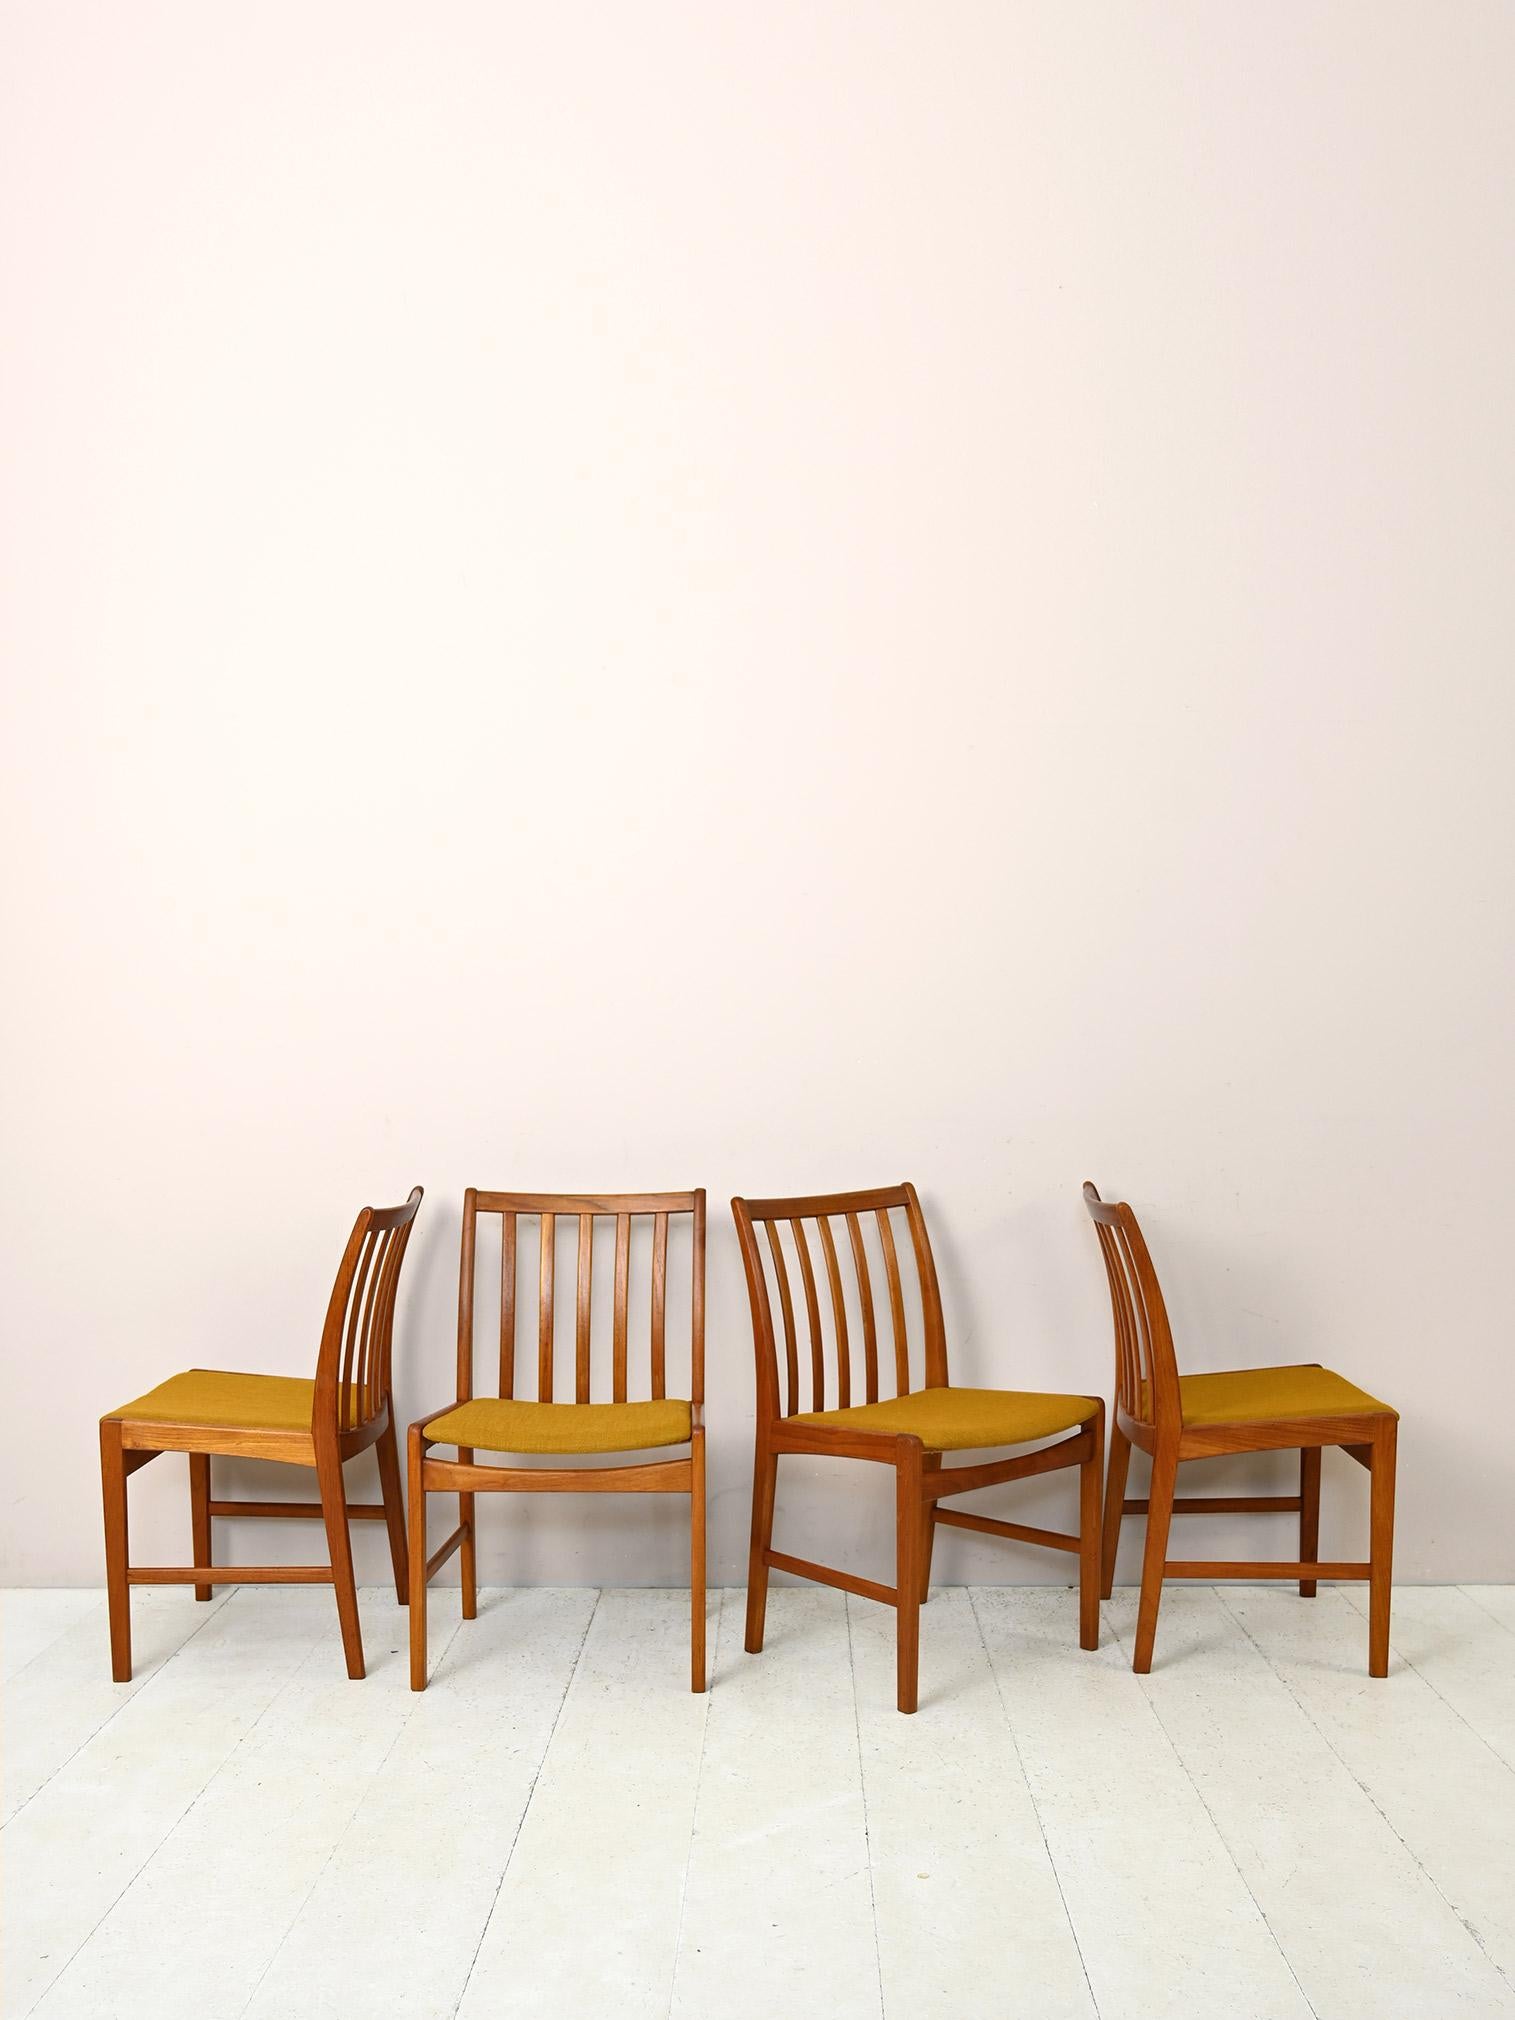 Set of 4 original vintage 1960s chairs.

Consisting of a teak wood frame and a lightly upholstered seat reupholstered with ochre fabric.
The modern and elegant lines hark back to Scandinavian taste for the simple and functional